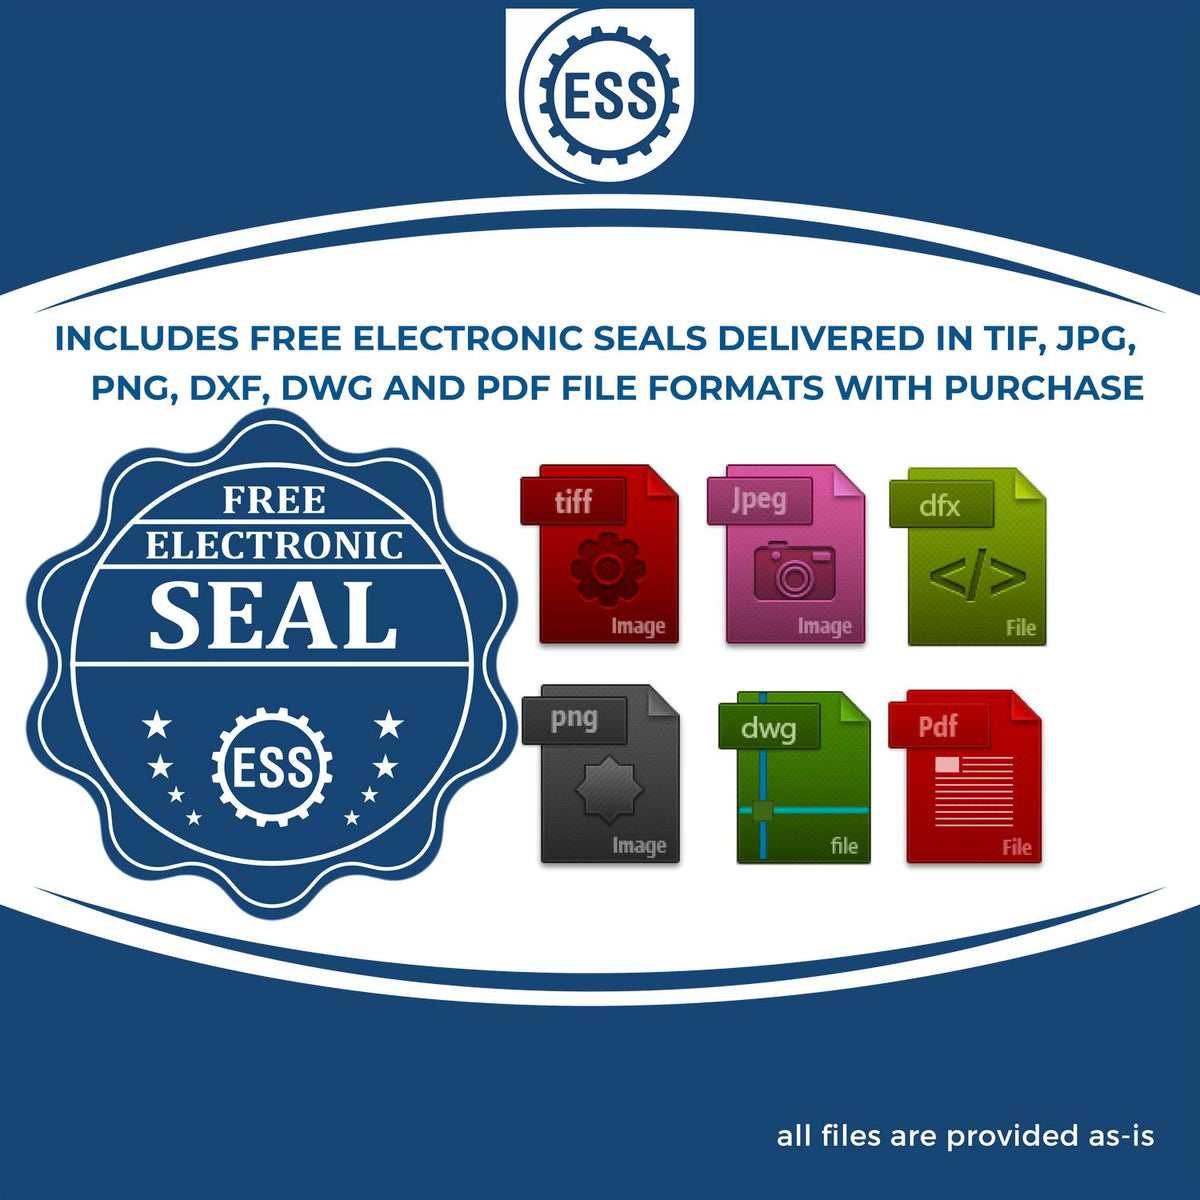 An infographic for the free electronic seal for the Slim Pre-Inked Rectangular Notary Stamp for Guam illustrating the different file type icons such as DXF, DWG, TIF, JPG and PNG.